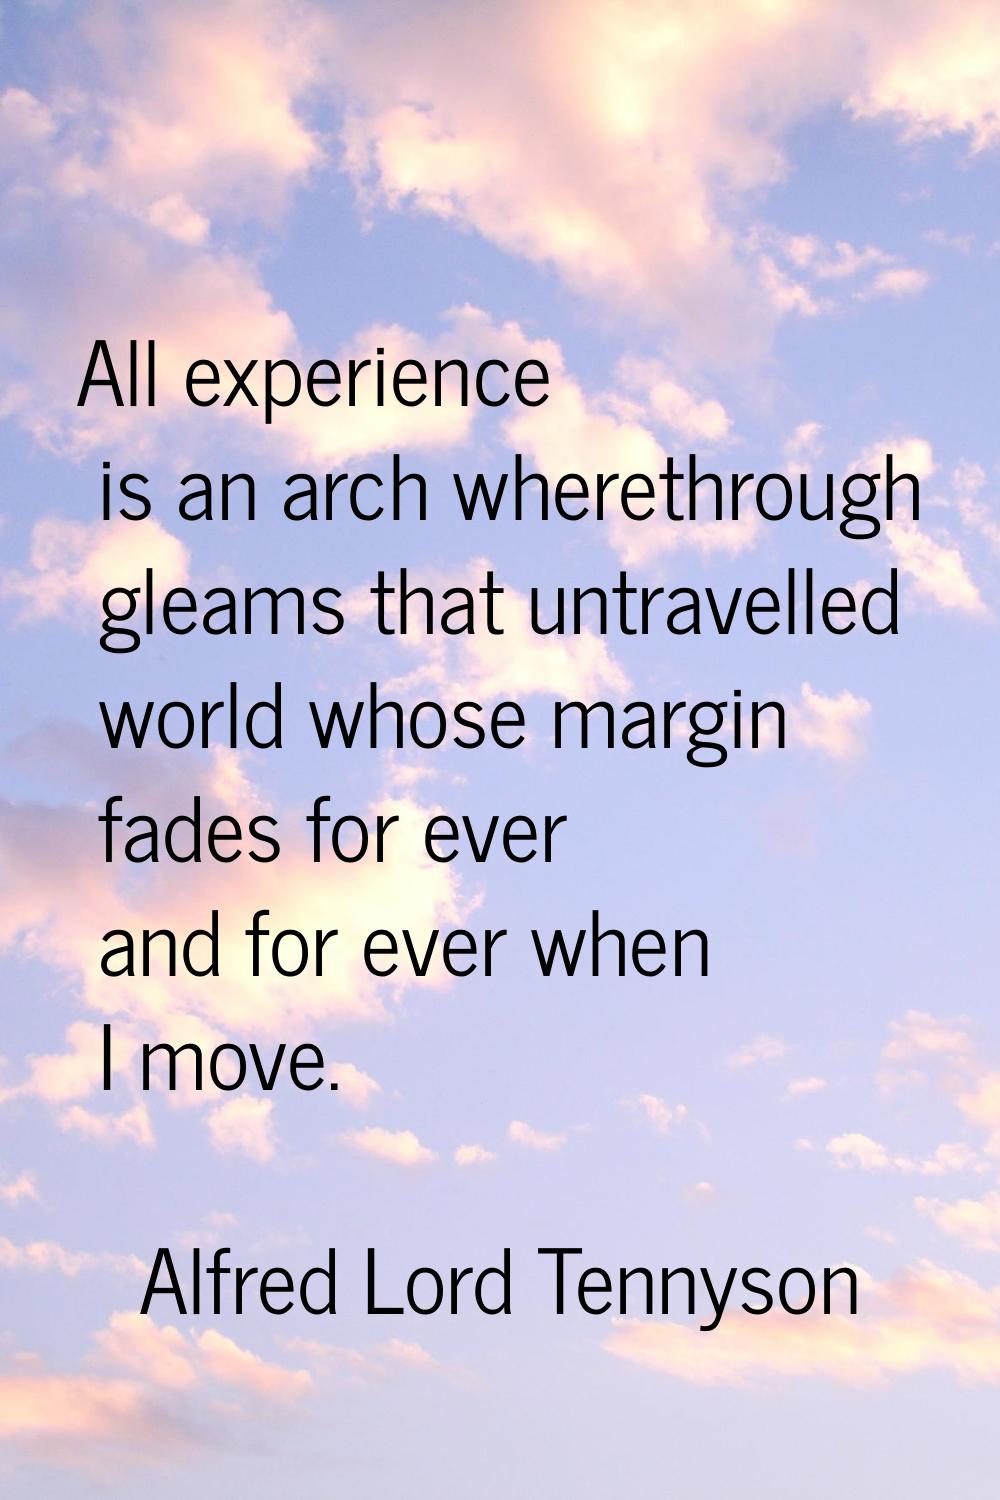 All experience is an arch wherethrough gleams that untravelled world whose margin fades for ever an